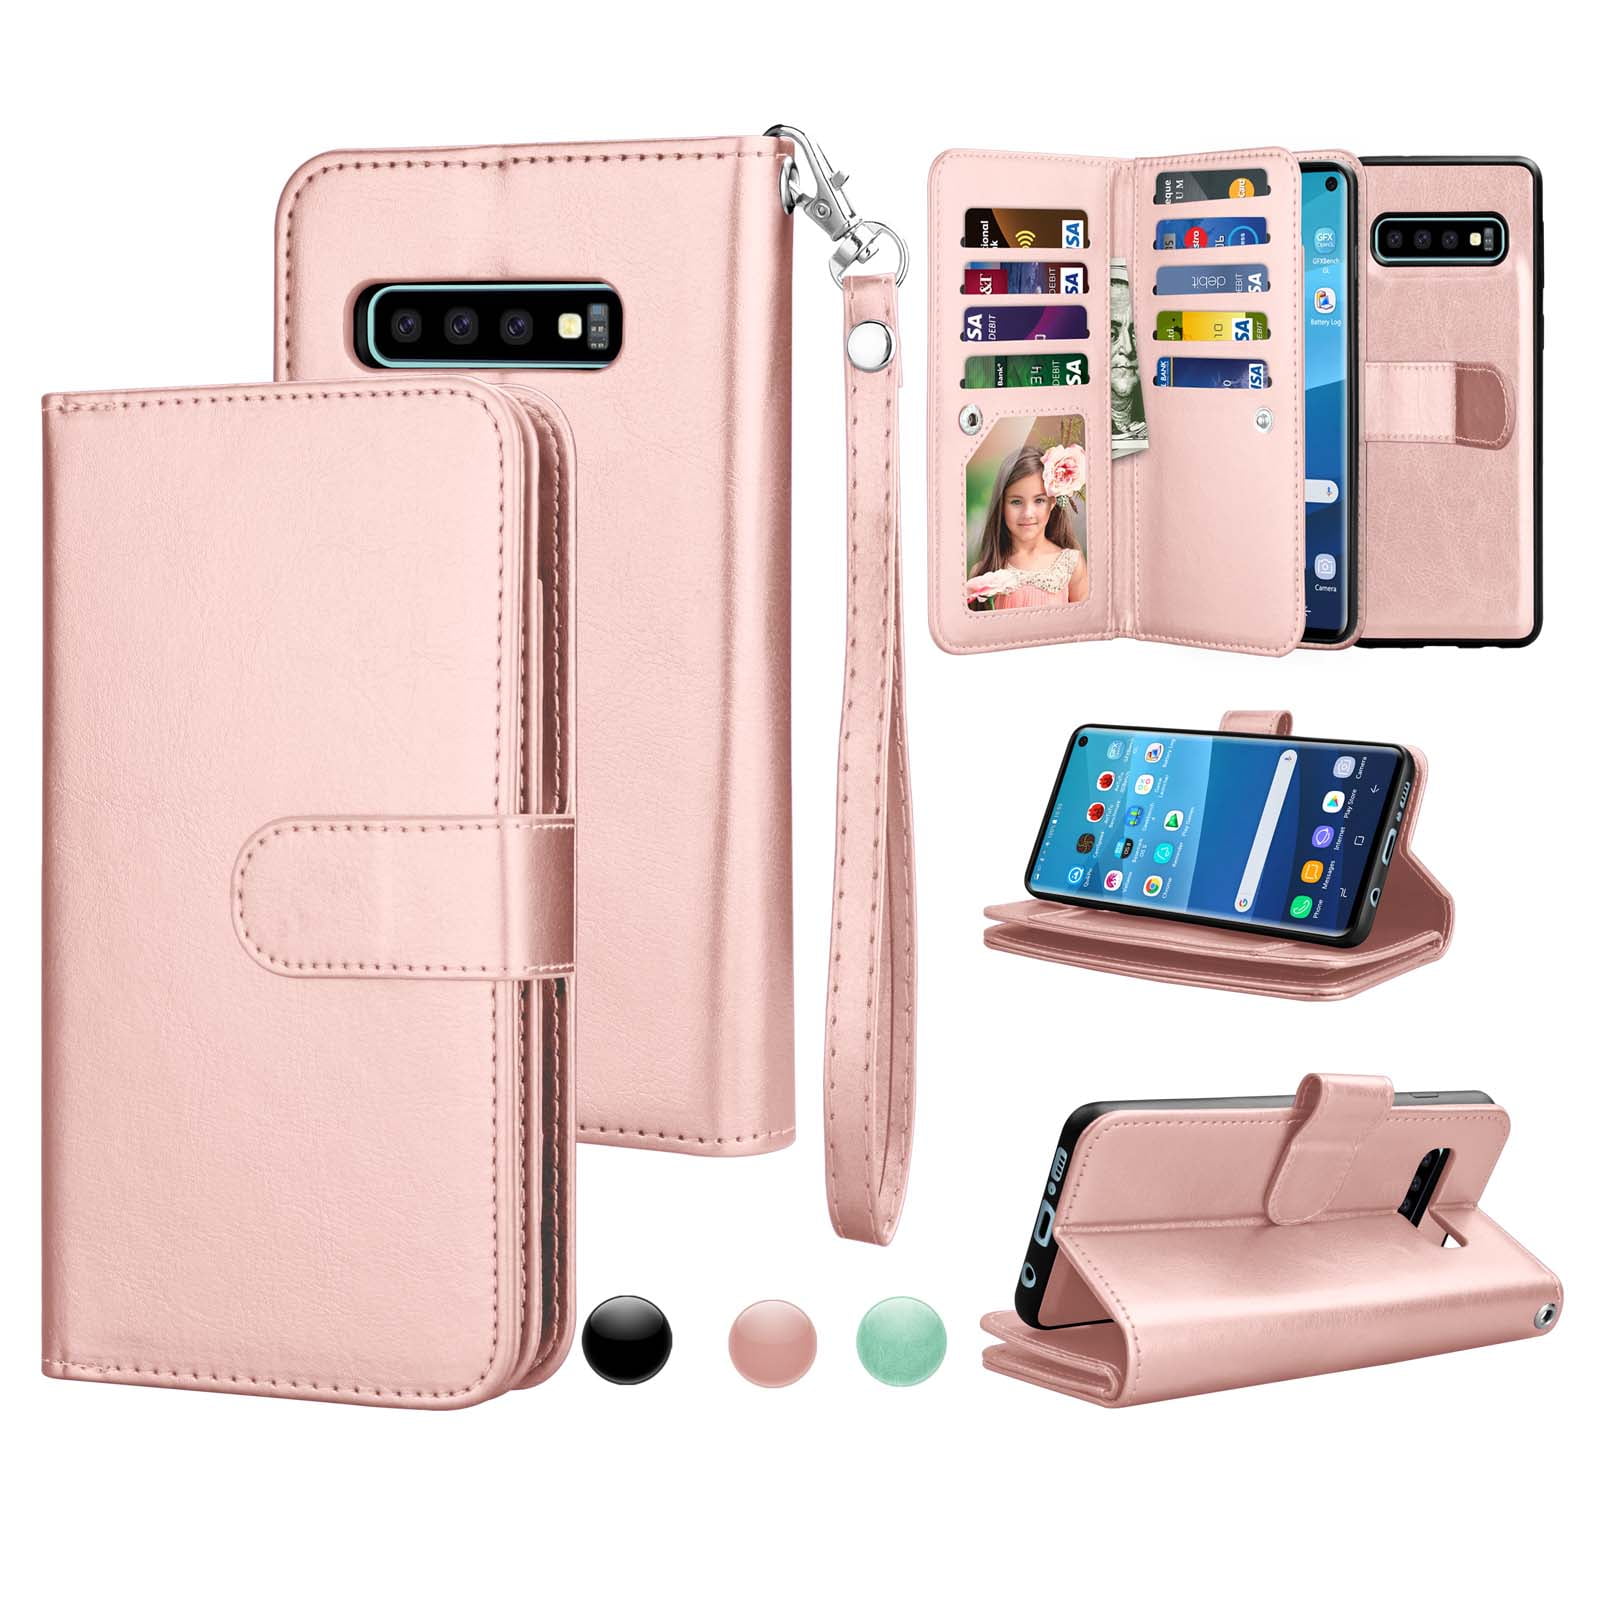 PU Leather Flip Cover Compatible with Samsung Galaxy S10e Elegant fashion9 Wallet Case for Samsung Galaxy S10e